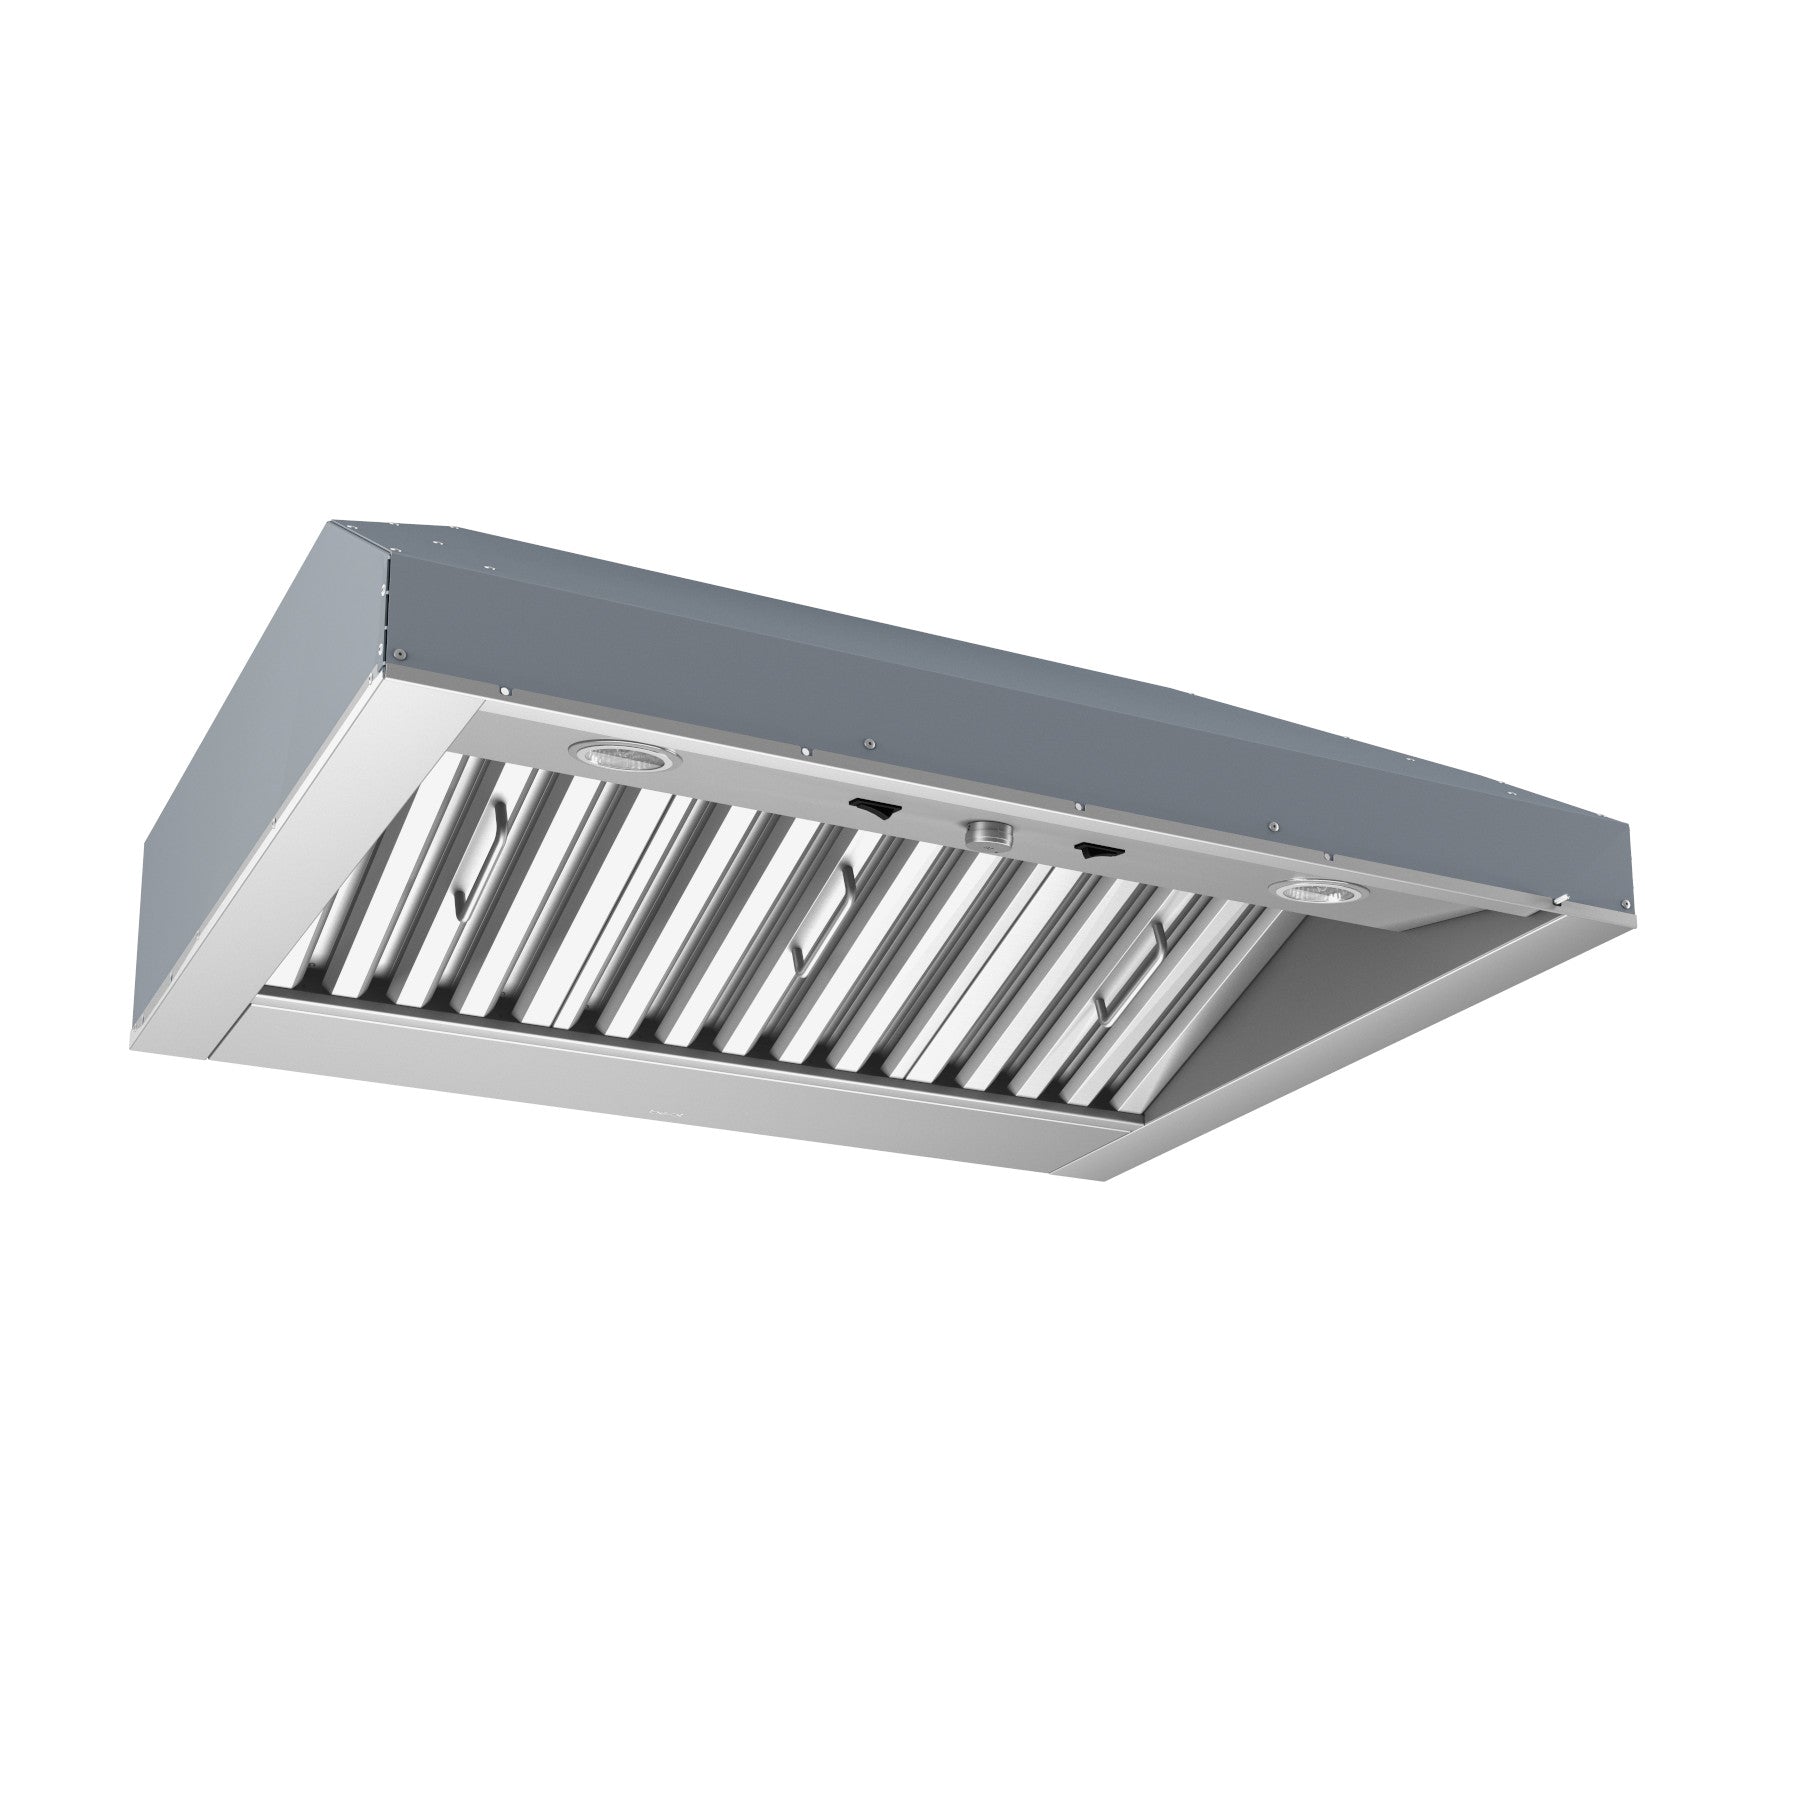 Best - 40.38 Inch Outdoor Range Hood Insert Vent in Stainless - CPD9M423SB